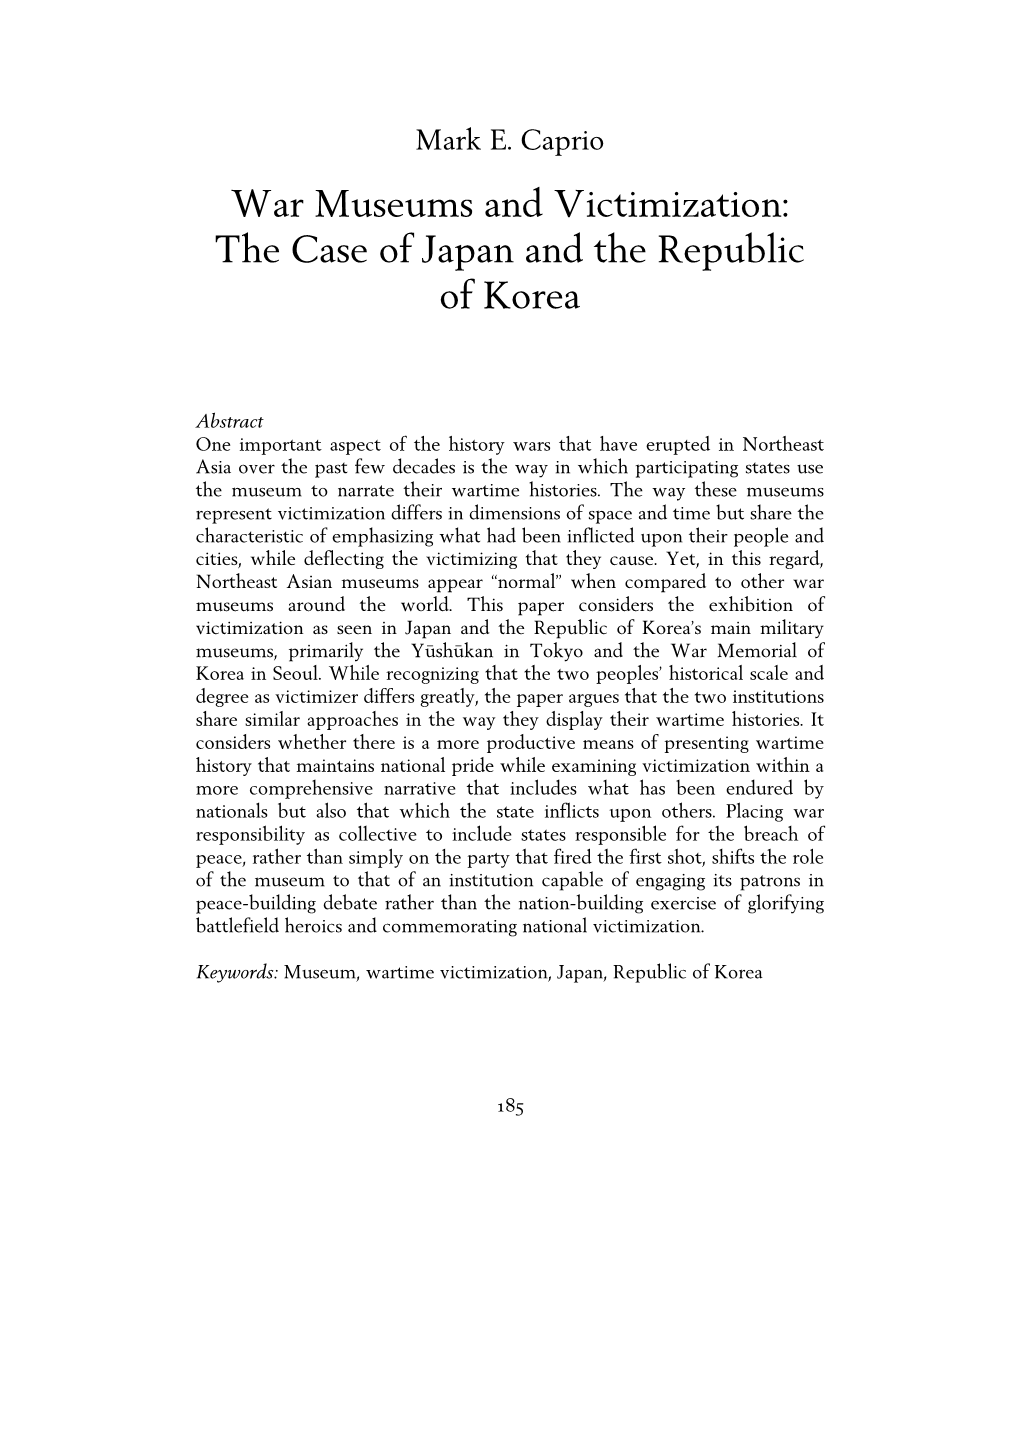 War Museums and Victimization: the Case of Japan and the Republic of Korea